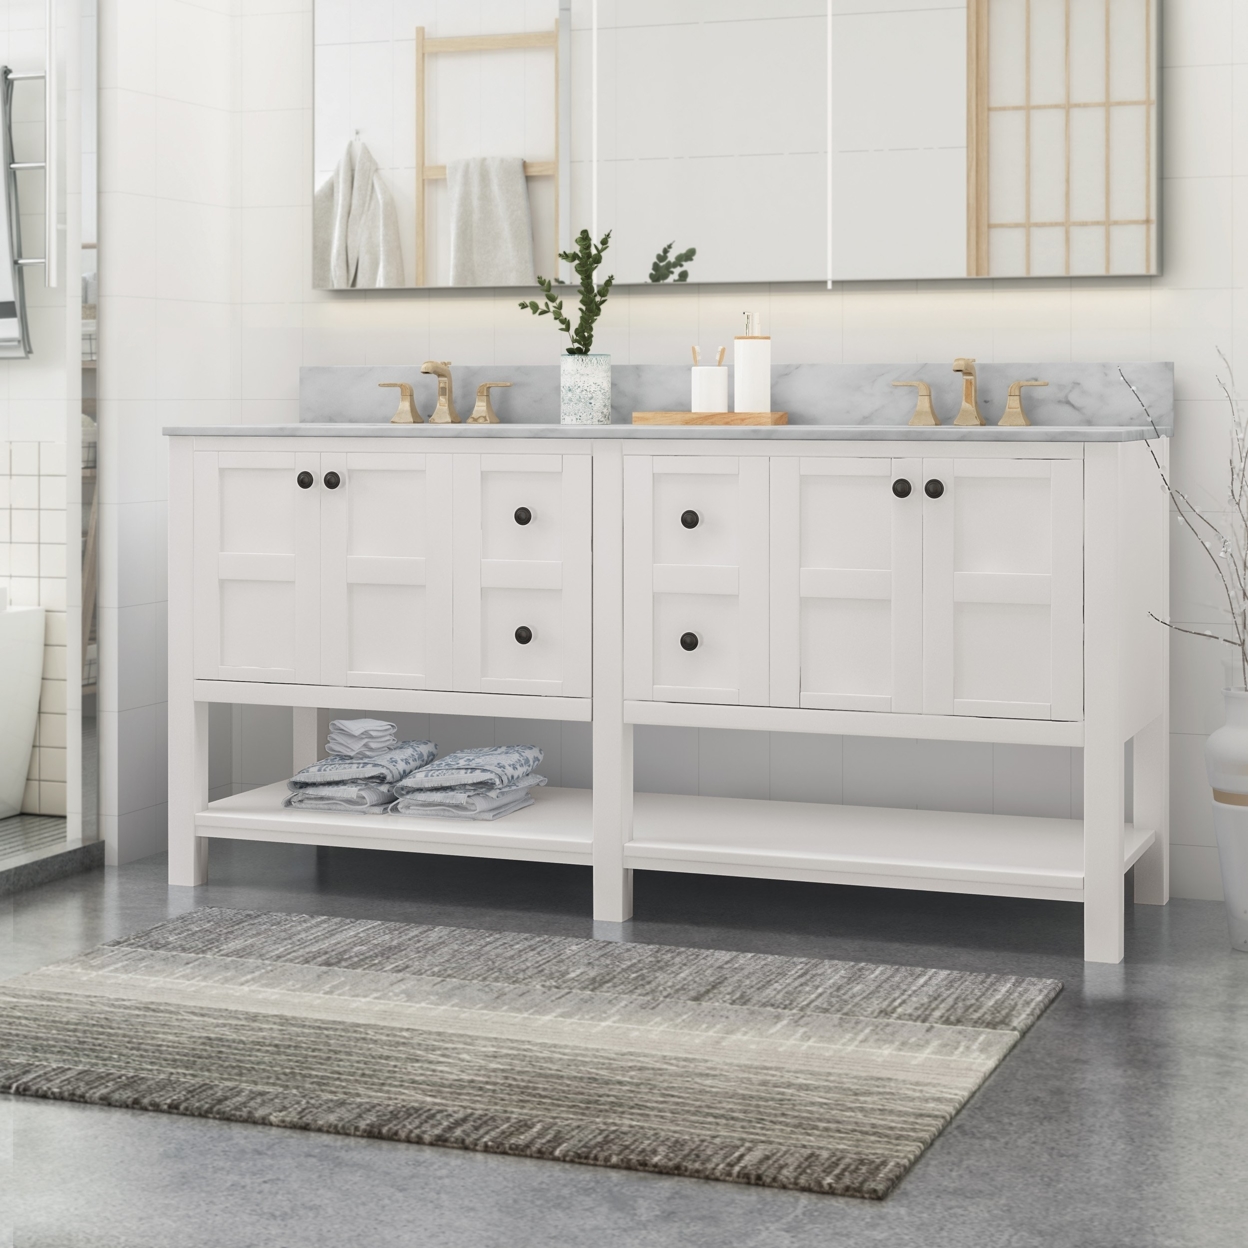 Jamison Contemporary 72 Wood Double Sink Bathroom Vanity With Marble Counter Top With Carrara White Marble - Gray